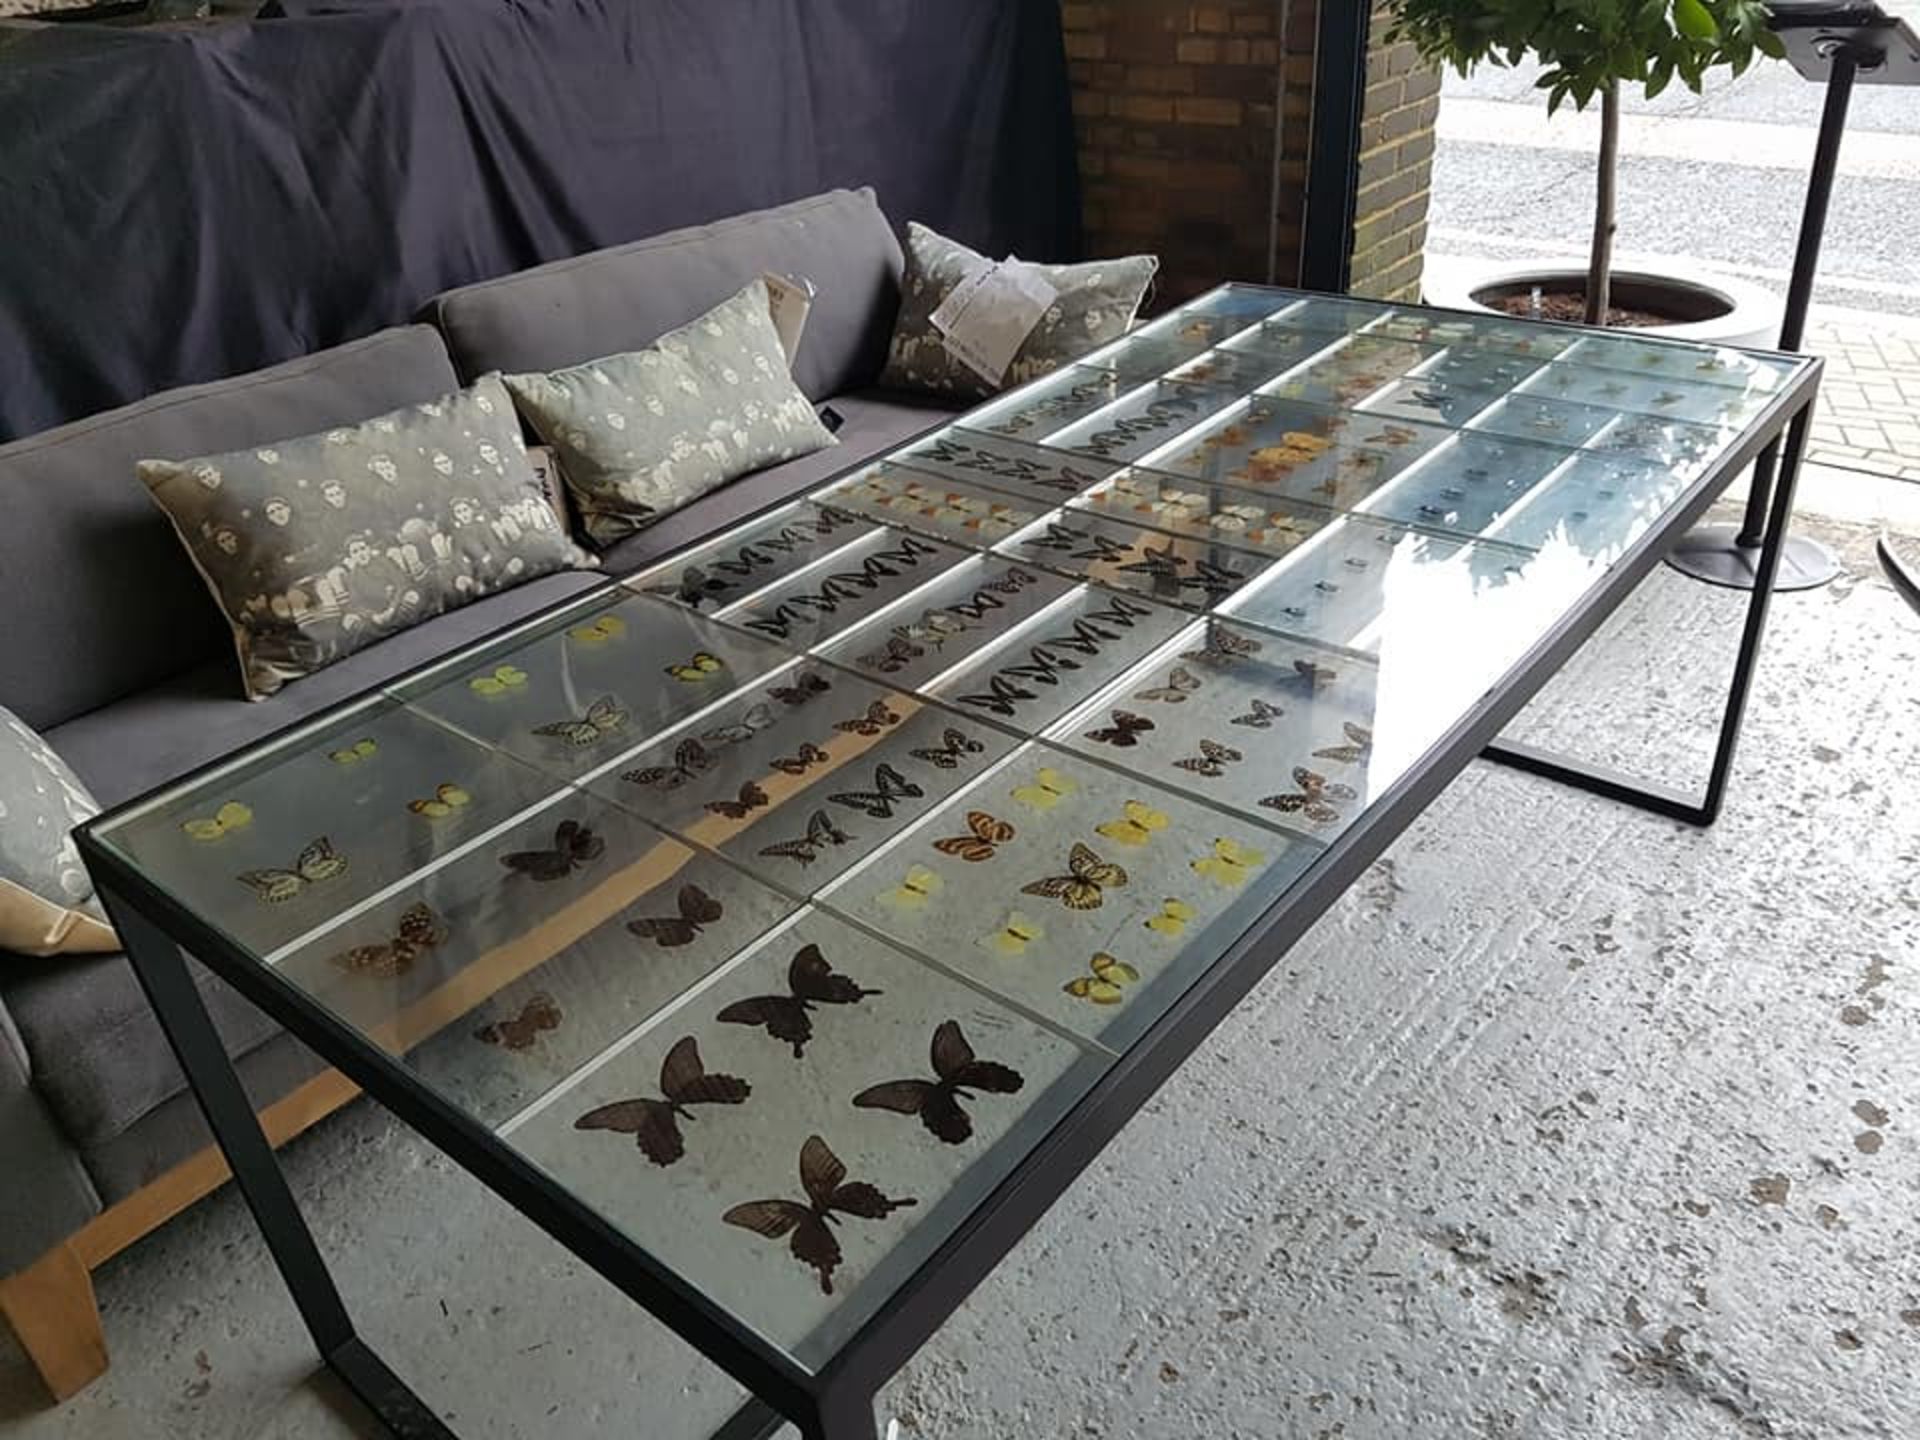 Butterfly Dining Table 197cm Acrylic & Plated Black 197 4 x 92 4 x 75cm RRP £6150 - Image 4 of 4